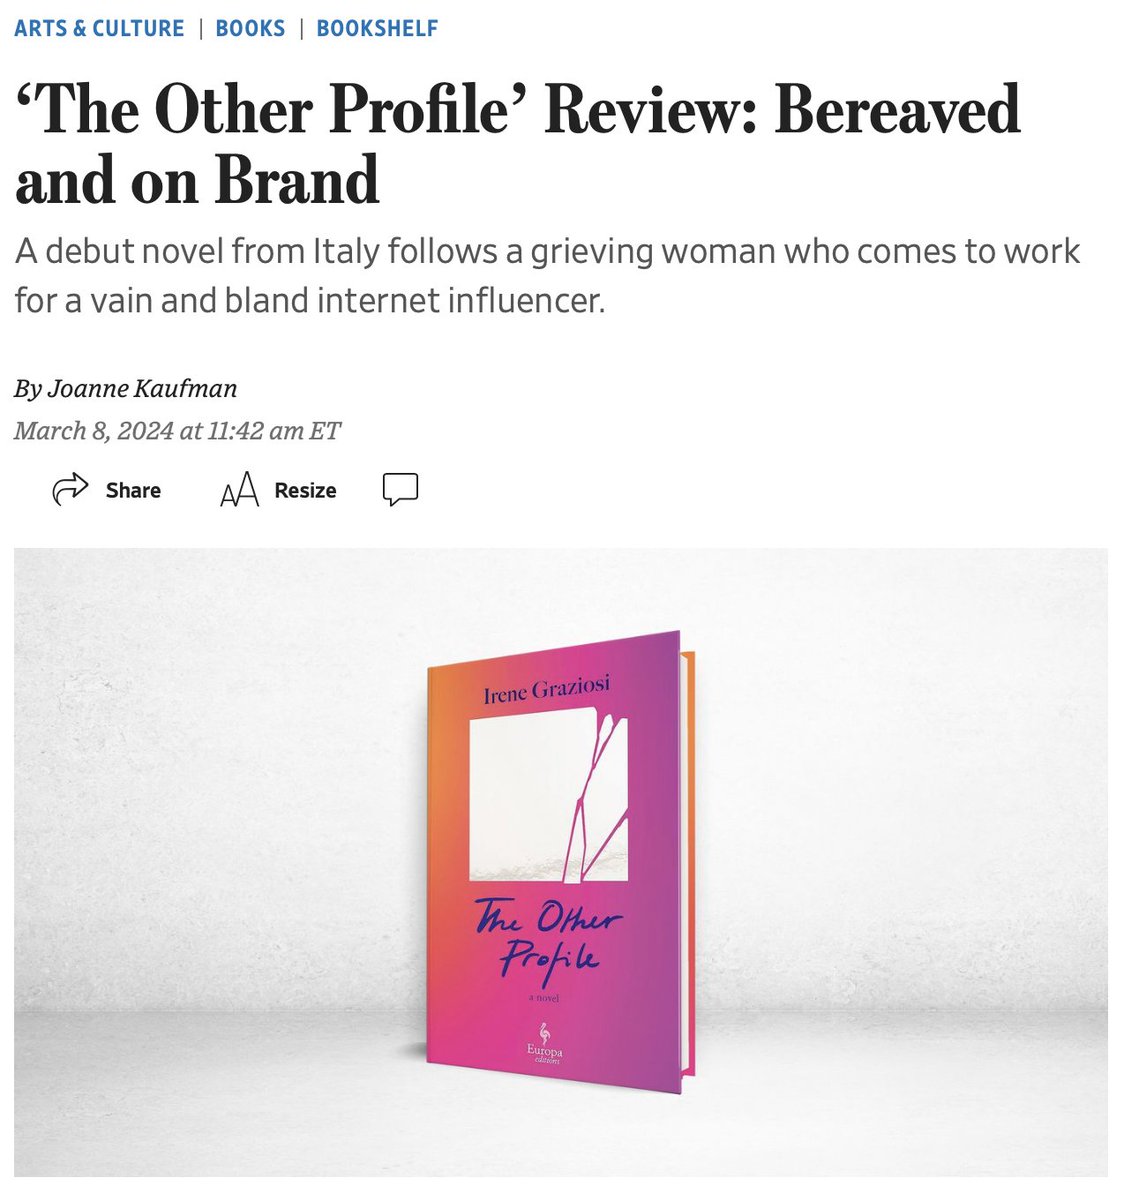 “Ms. Graziosi is a shrewd and funny chronicler of social-media and influencer culture.” @JoanneKaufmanny reviews THE OTHER PROFILE in this weekends’s @WSJBooks. wsj.com/arts-culture/b…